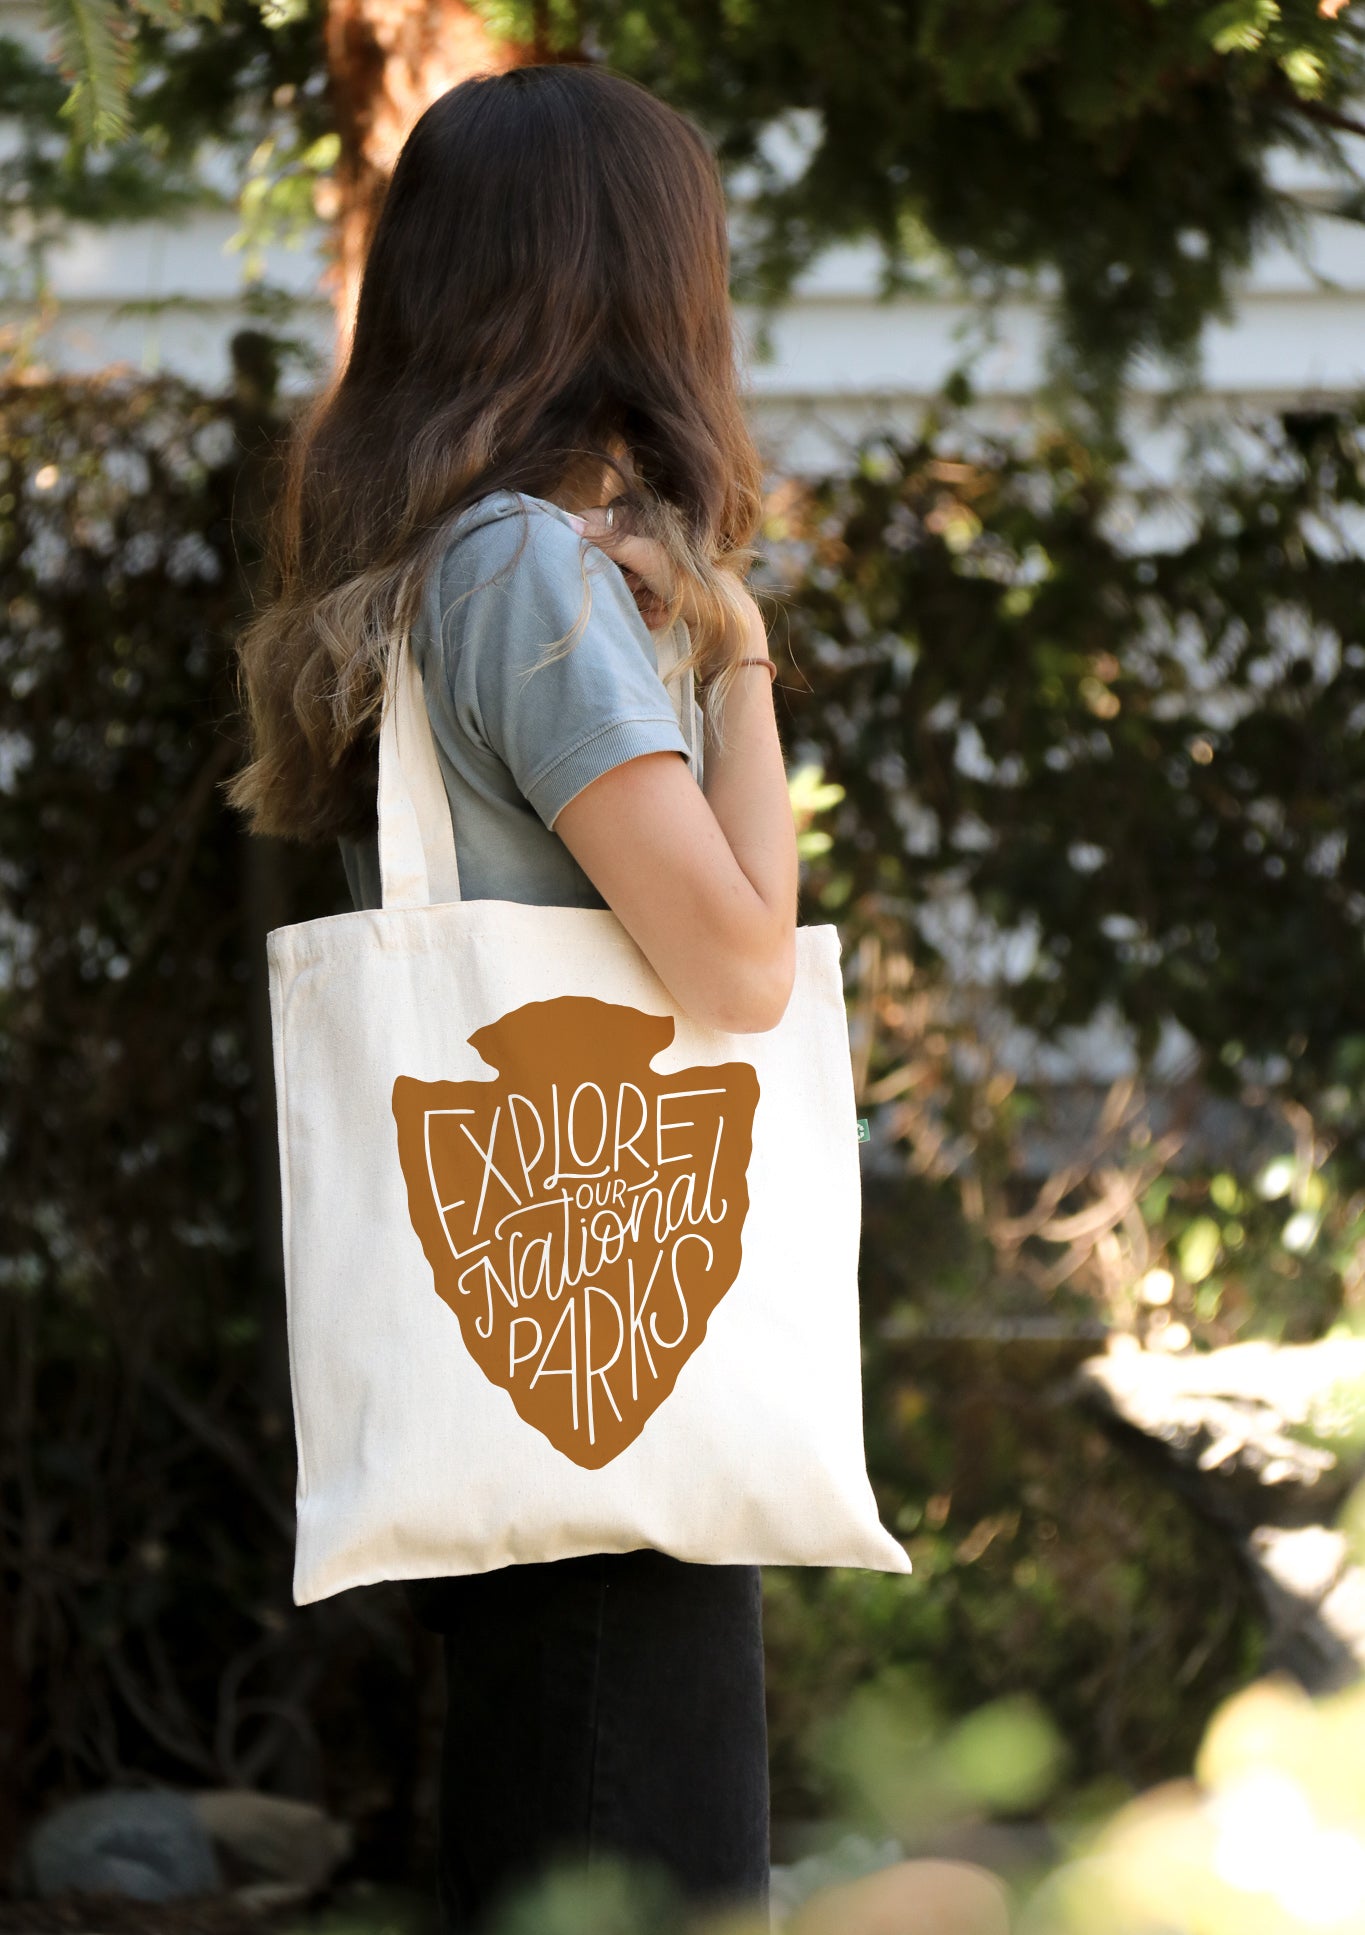 Explore Our National Parks - Canvas Tote Bag - Recycled Cotton